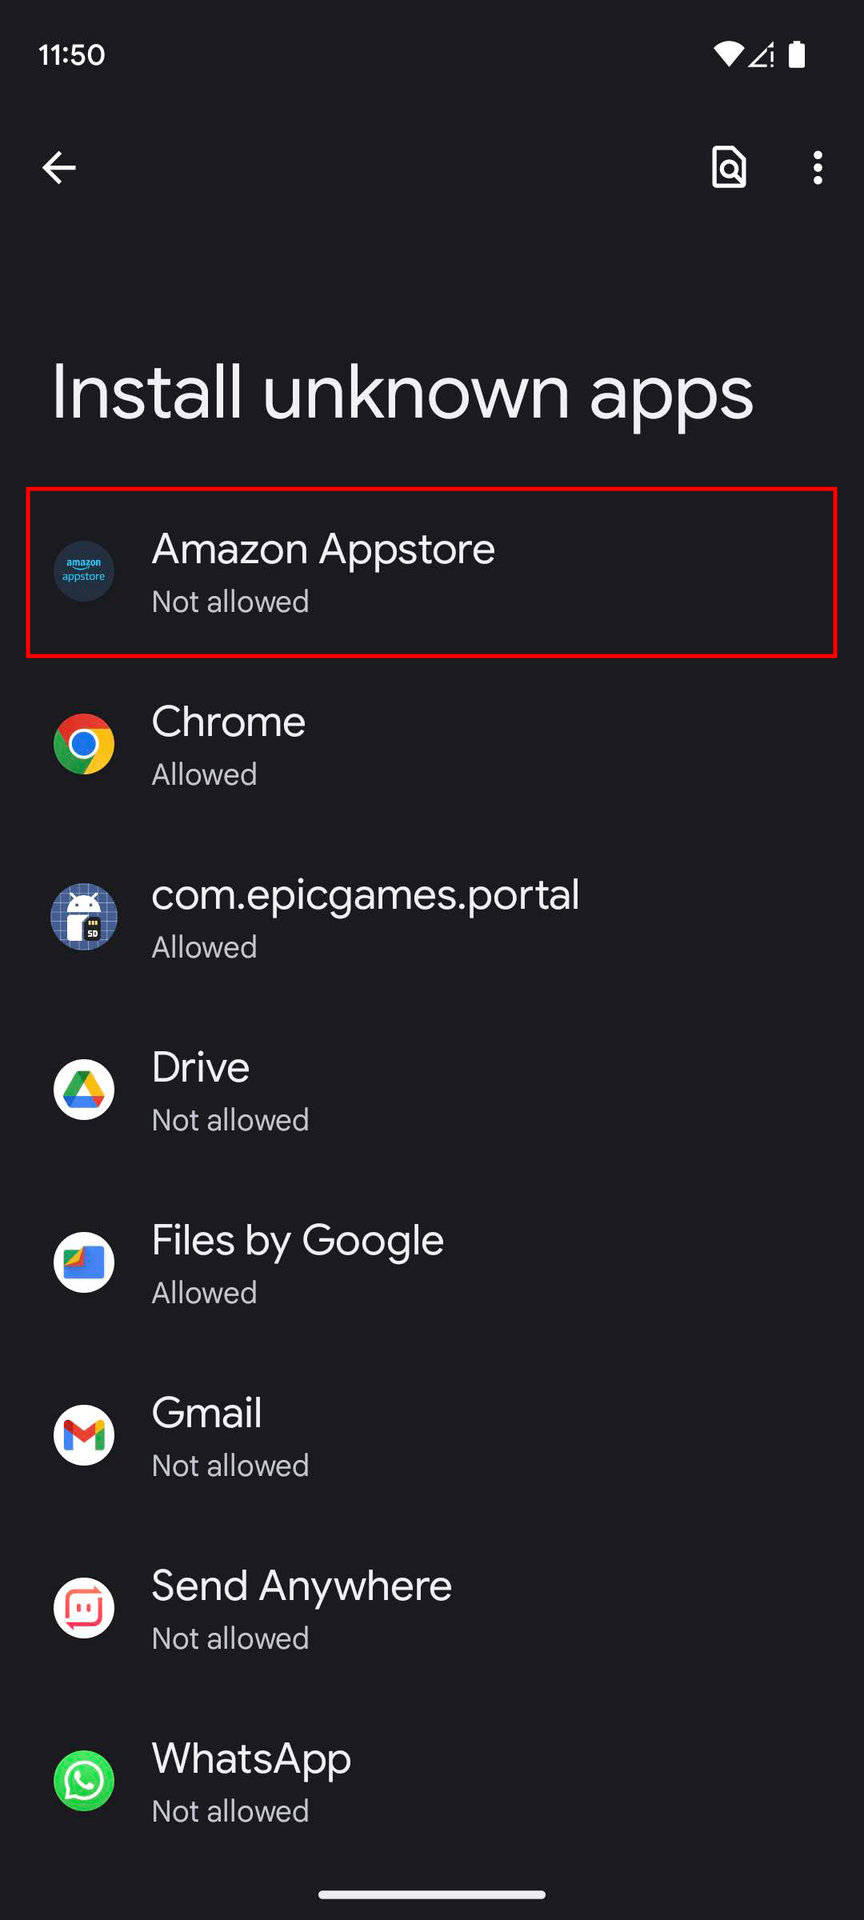 How to install apps from the Amazon App Store (2)